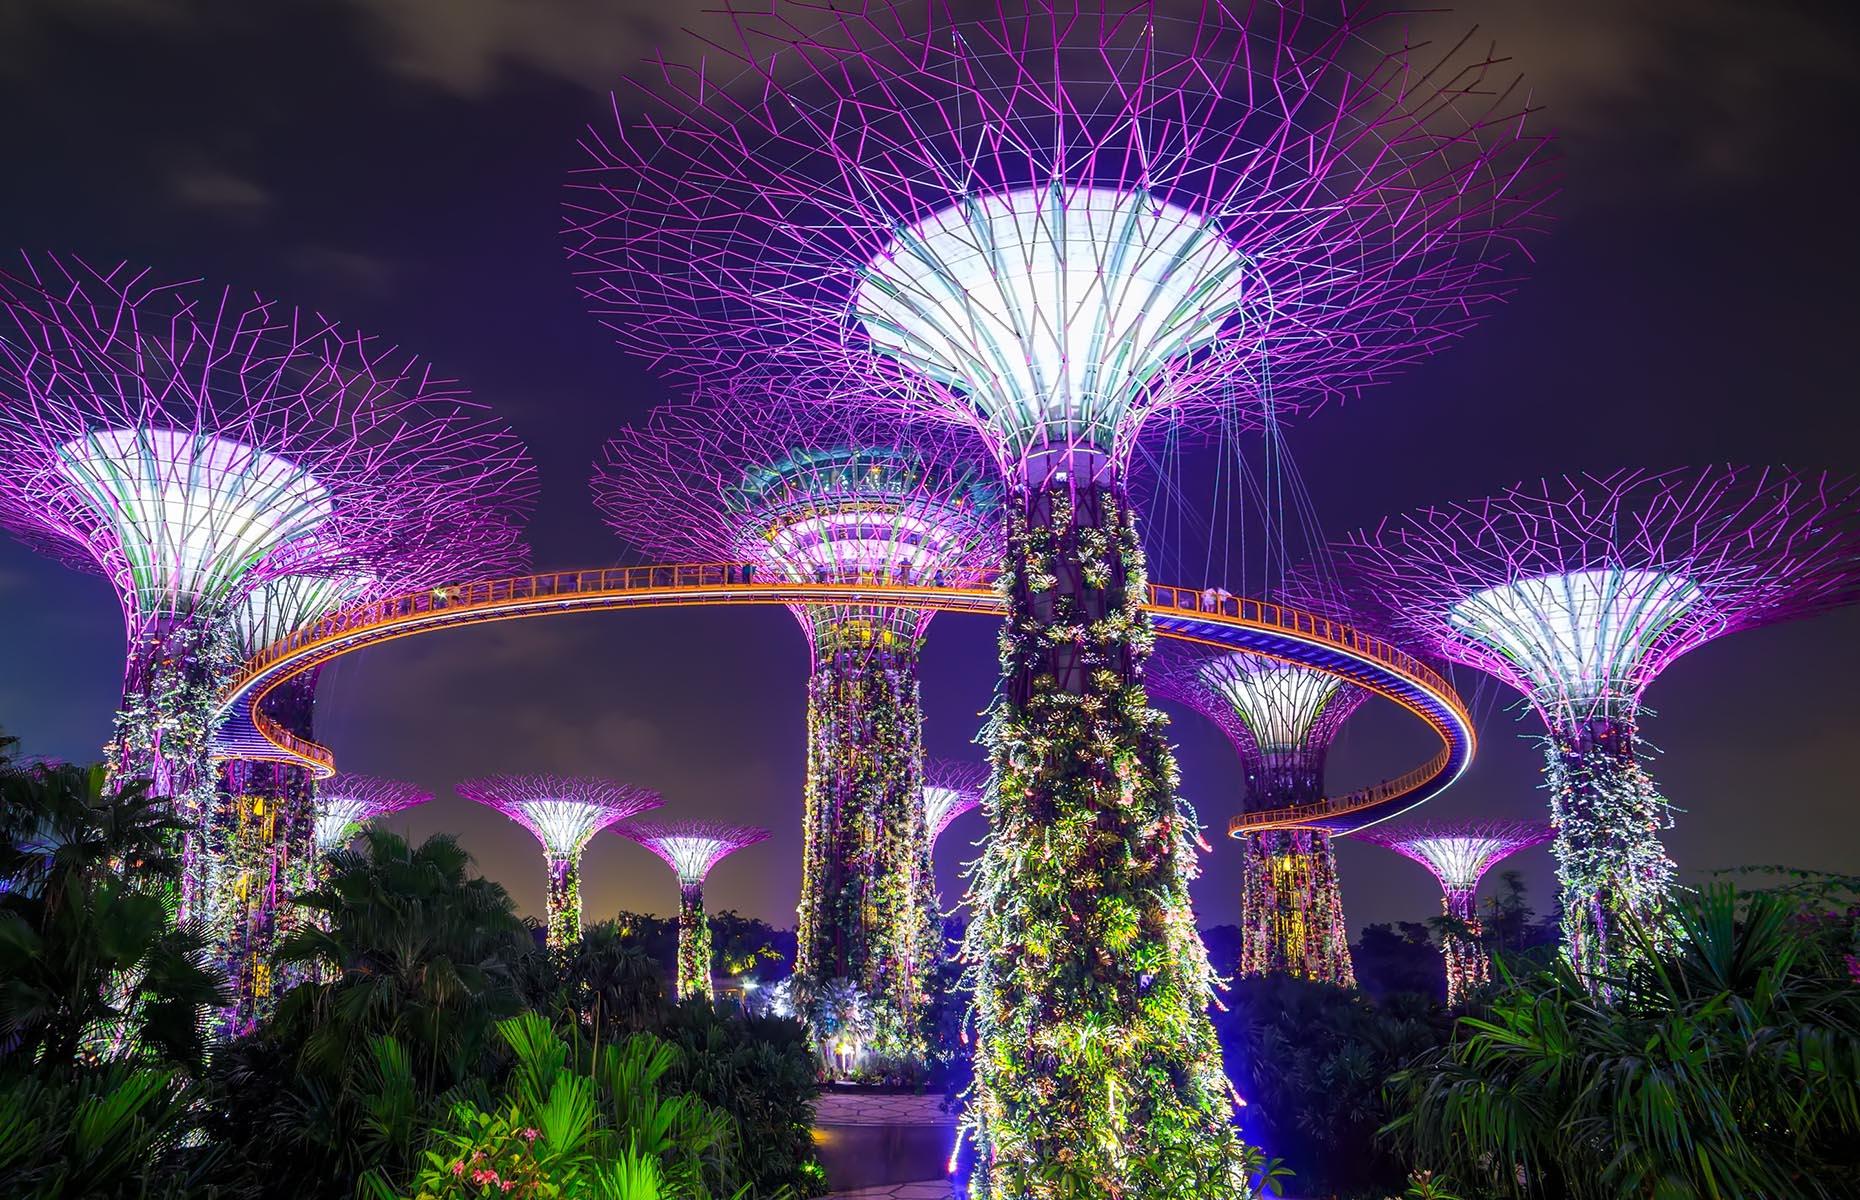 <p>Stay at Gardens By The Bay until nightfall and you can witness the stunning Garden Rhapsody light and music show. The twice-nightly performance grips everyone in its vicinity, as people lie on the lawn beneath the metal trees and take in the dazzling 15-minute show for free. Each month takes on a new theme, but one constant is the trees’ ability to entertain. Sure, take some videos and a few snaps, but remember to also just lie back and soak up this surreal atmosphere in such special surroundings.</p>